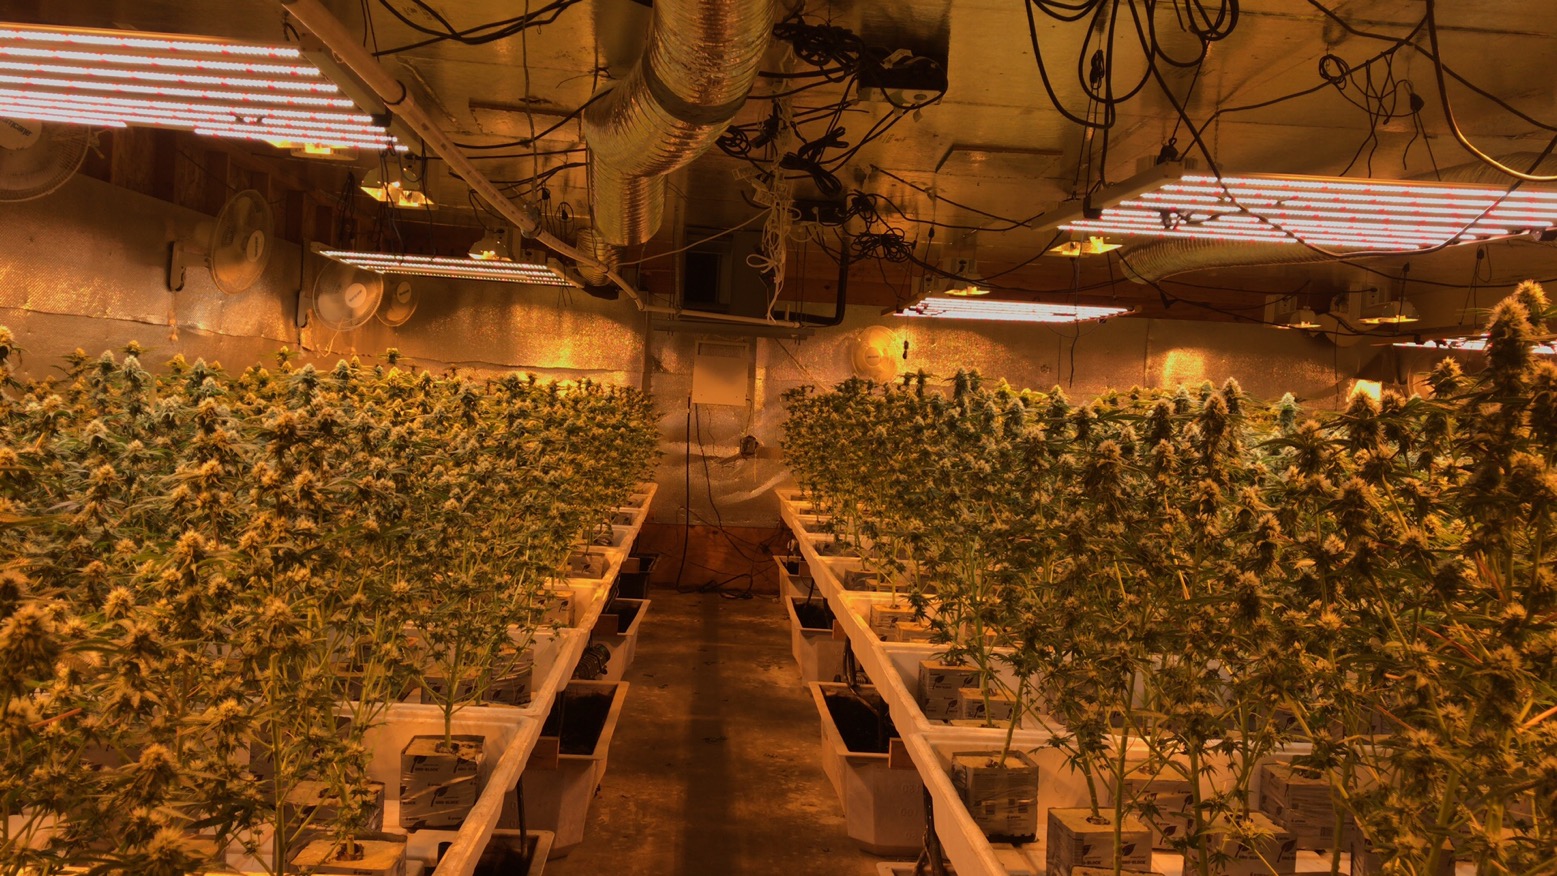 The suppliers of The world's largest diversified company led grow plant lights to plant Medicinal herb